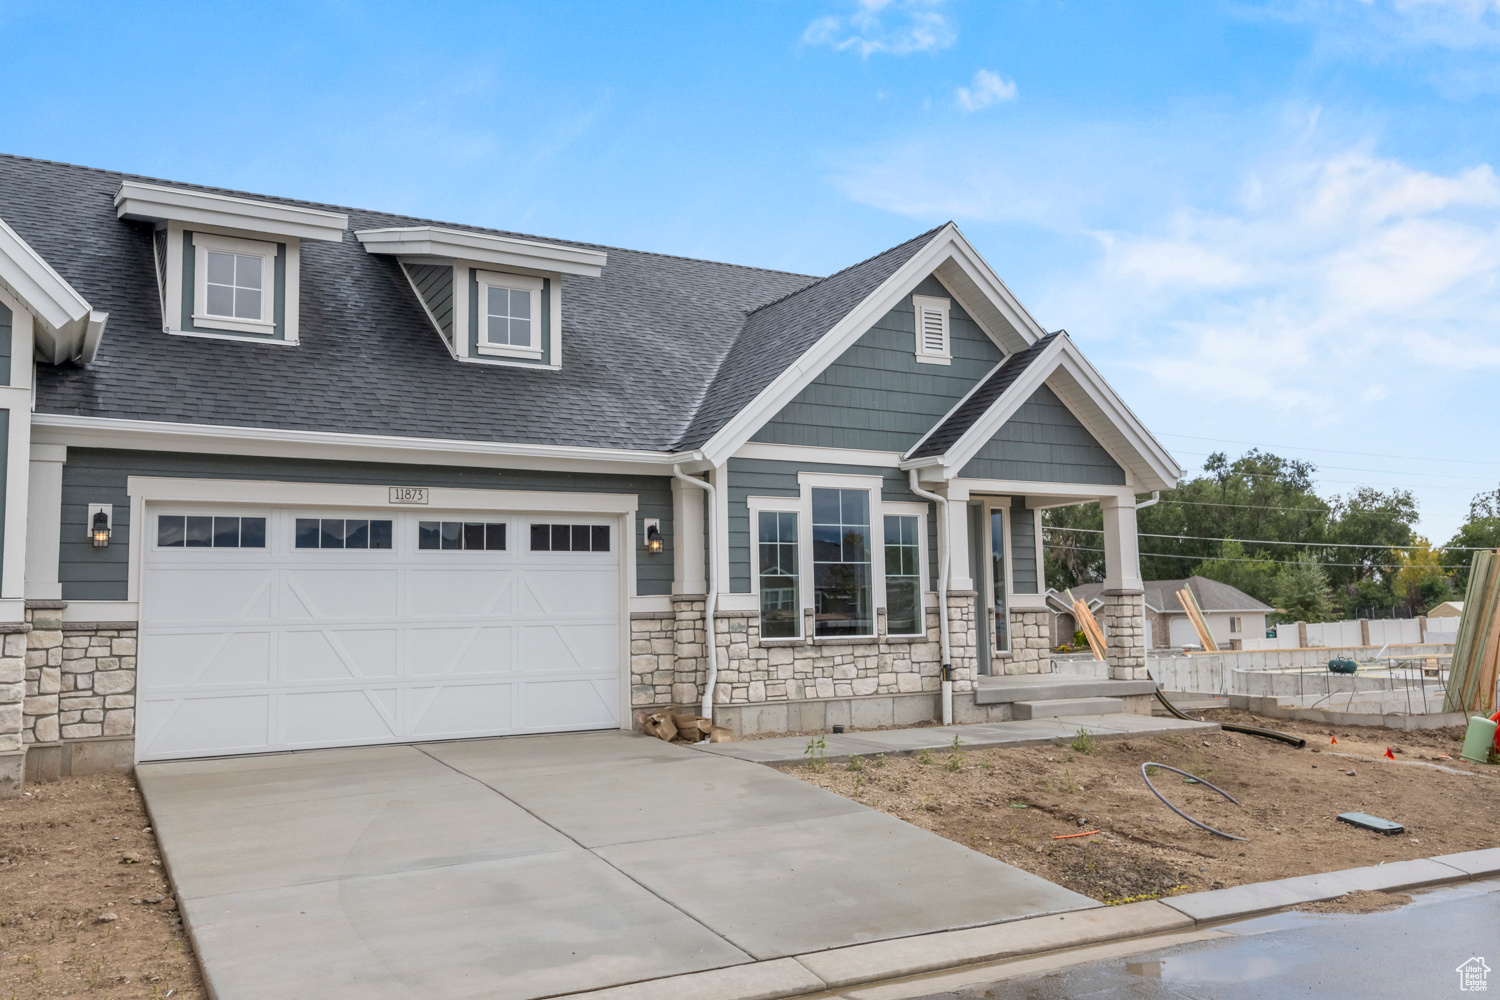 Craftsman-style home featuring a garage and covered porch